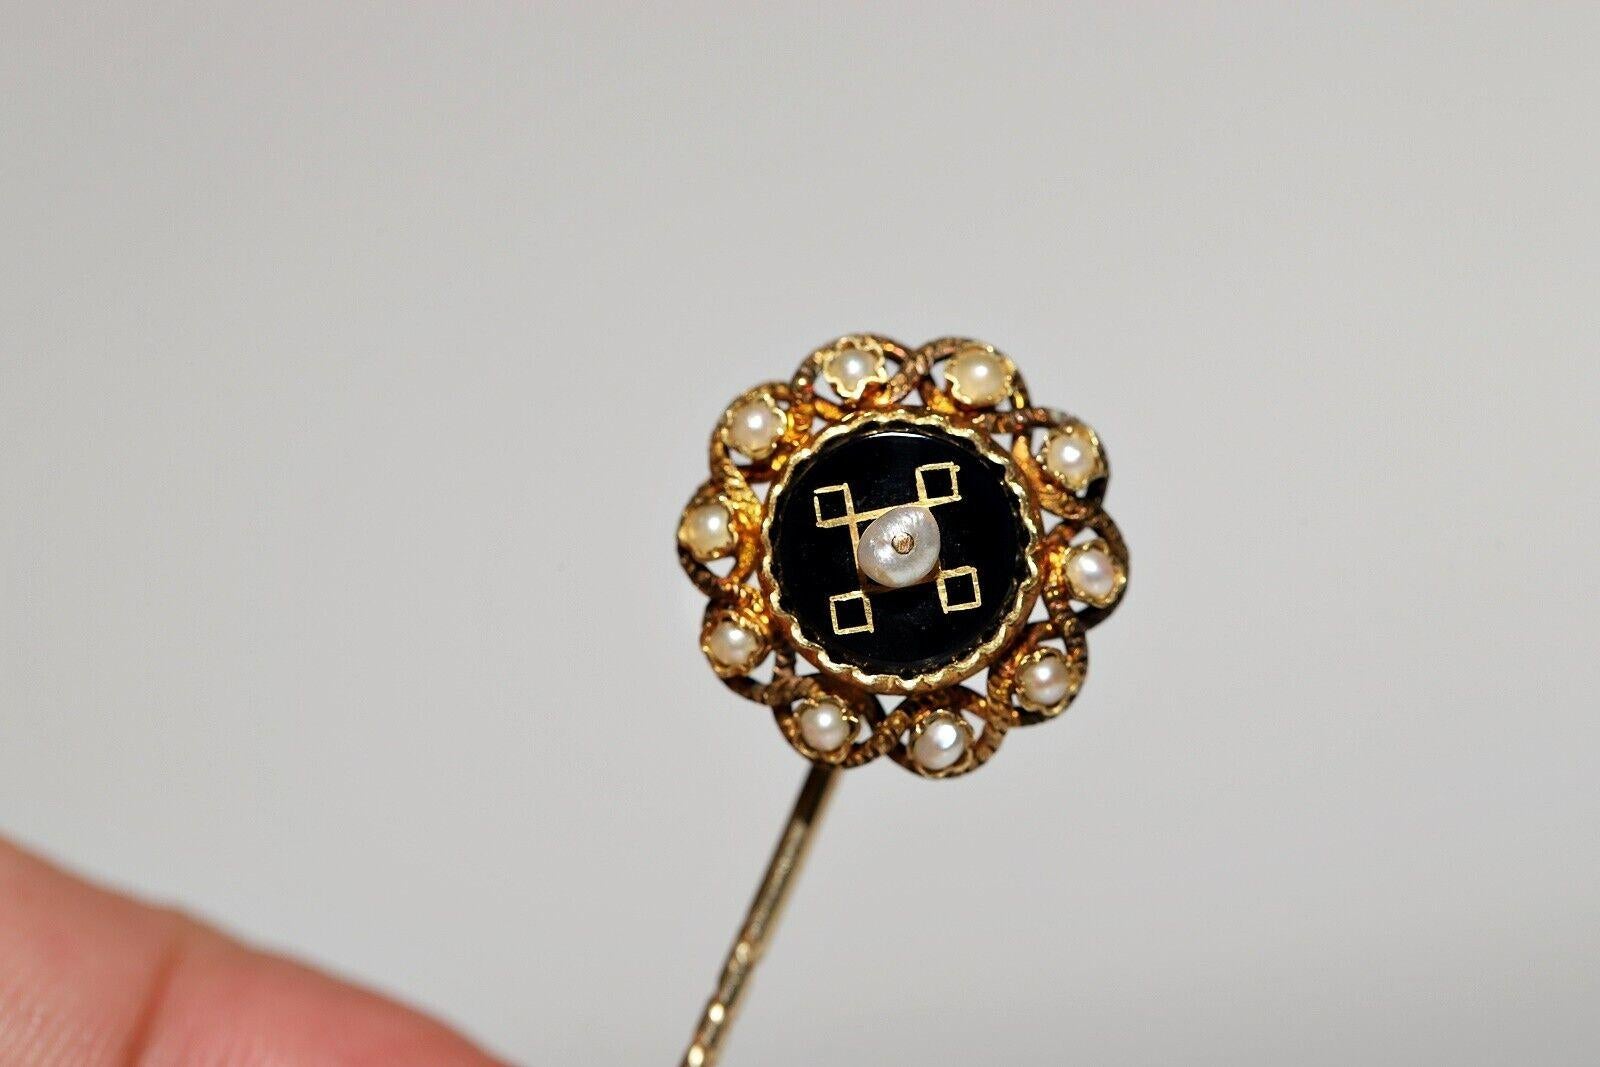  Antique Original Circa 1900s 14k Gold Natural Pearl And Onyx Decorated Brooch For Sale 3